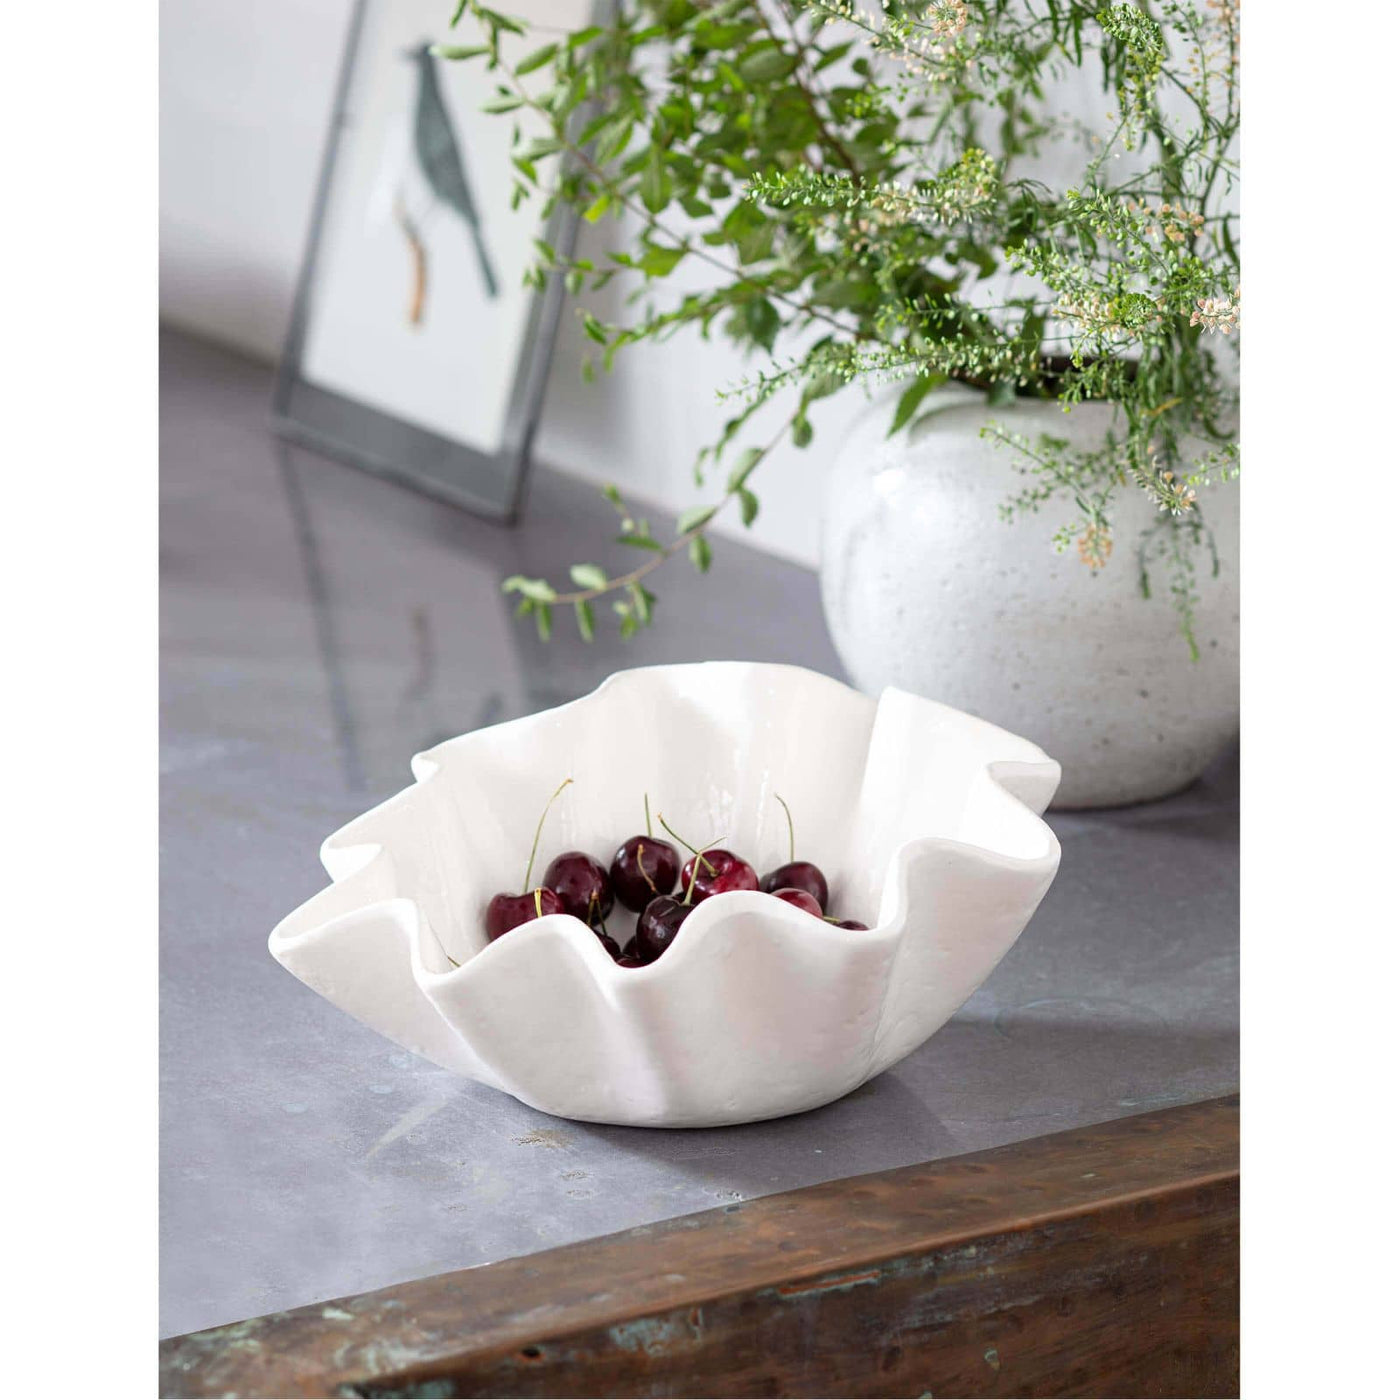 BOWL RUFFLE CERAMIC (Available in 2 Sizes)